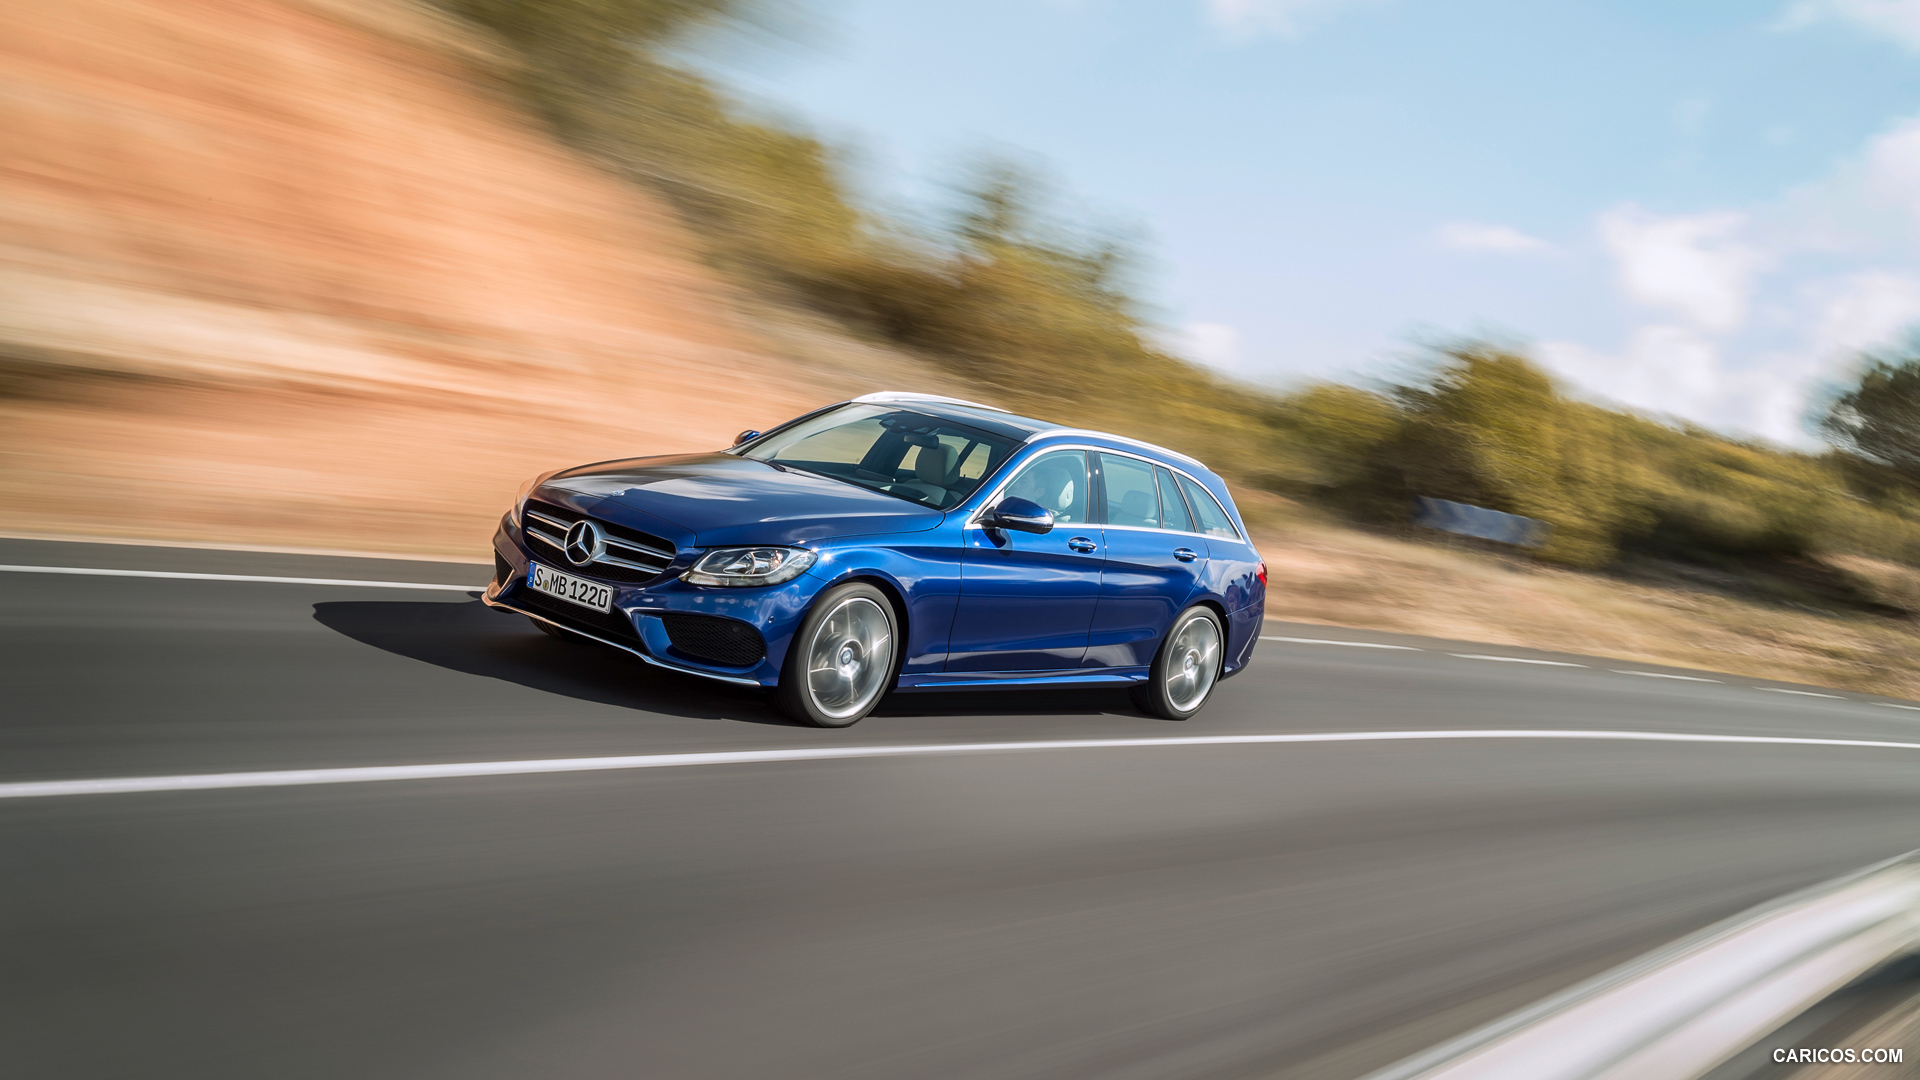 2015 Mercedes-Benz C-Class Estate C250 BlueTEC 4MATIC (AMG sports package) - Front, #54 of 173